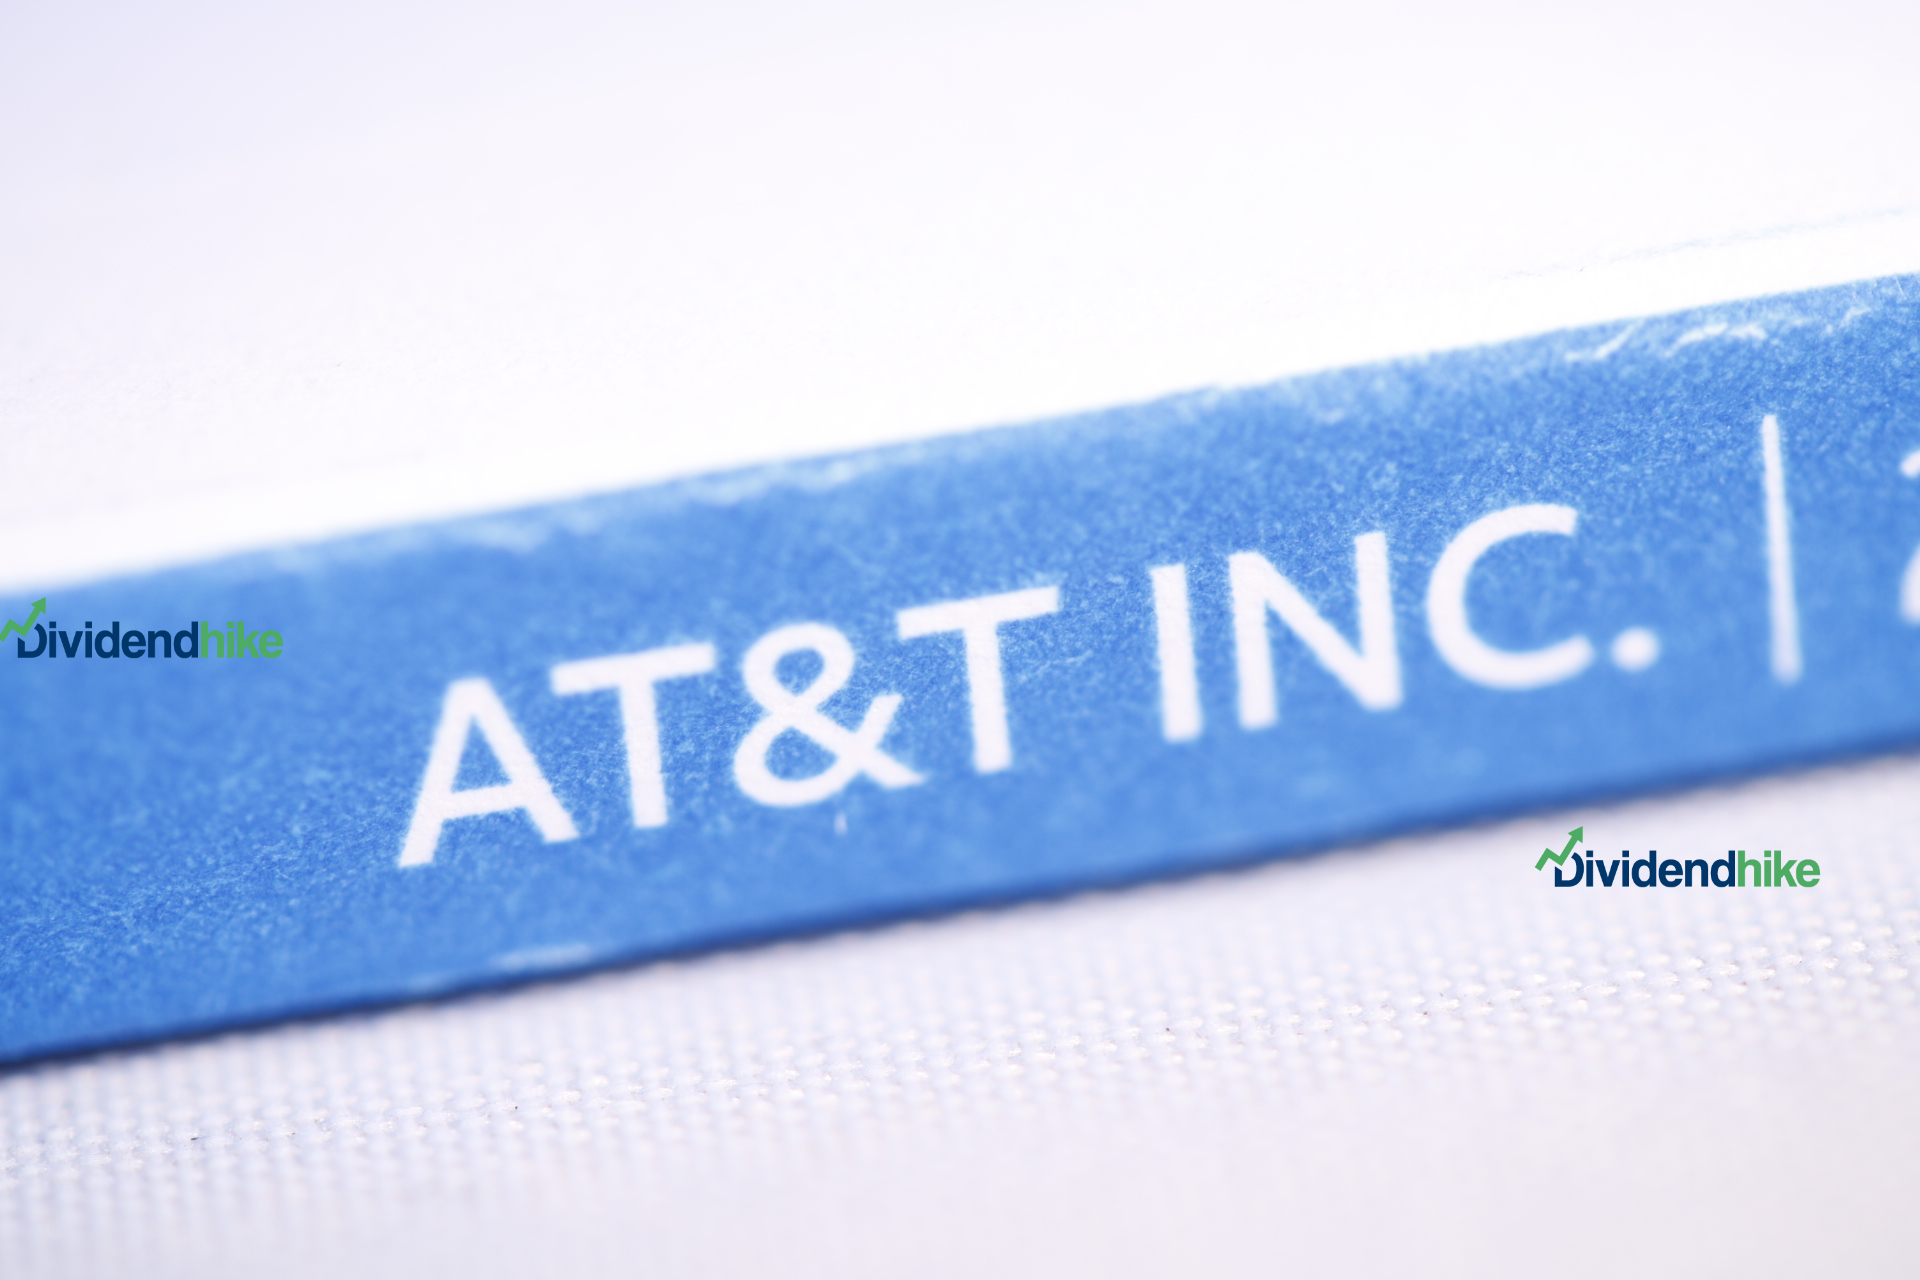 AT&T hikes dividend by 2.1%